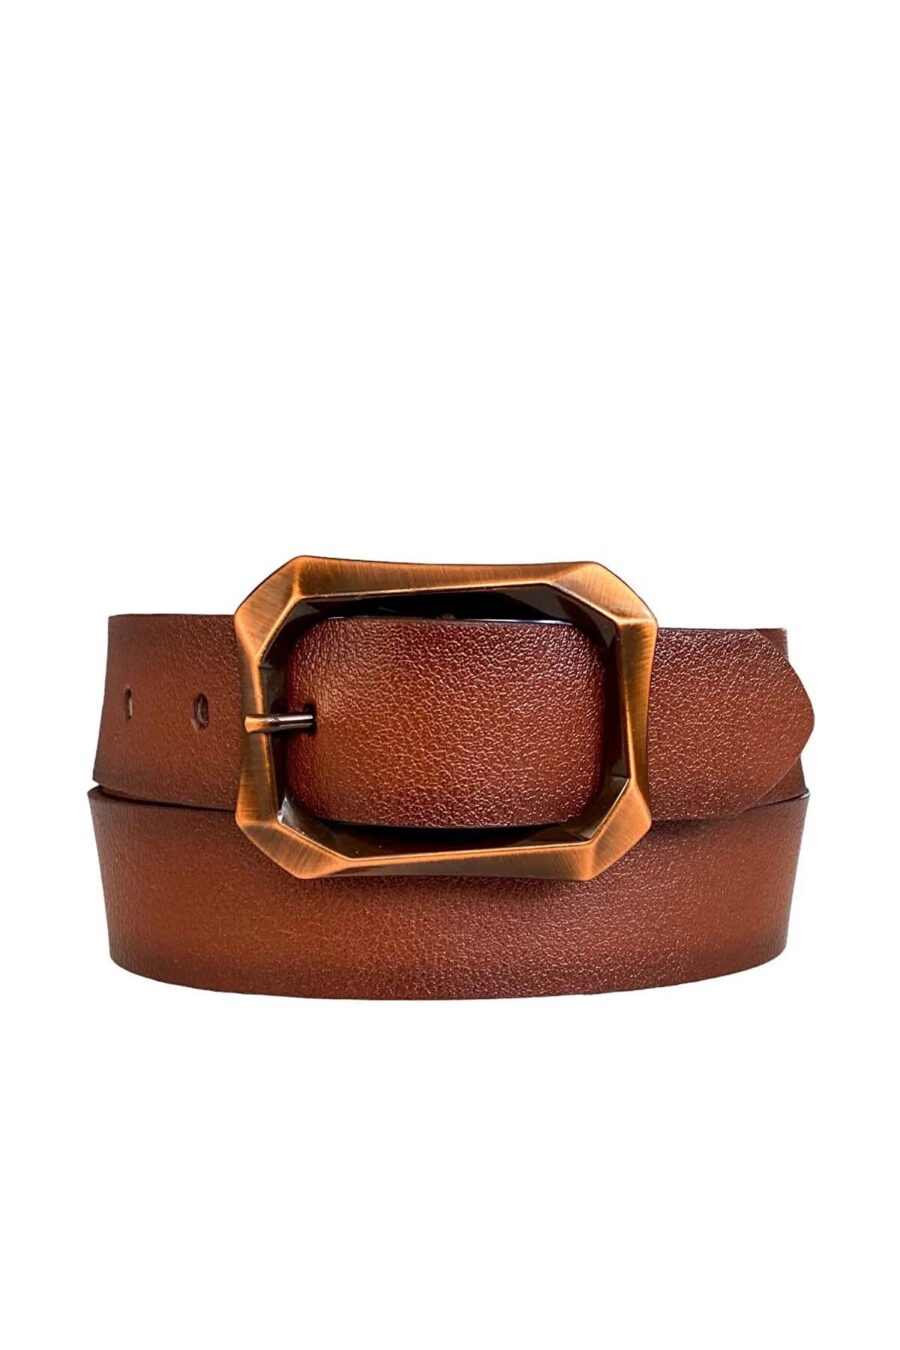 tobacco mom jeans belt with copper buckle 4 0 cm 08 bakir 20